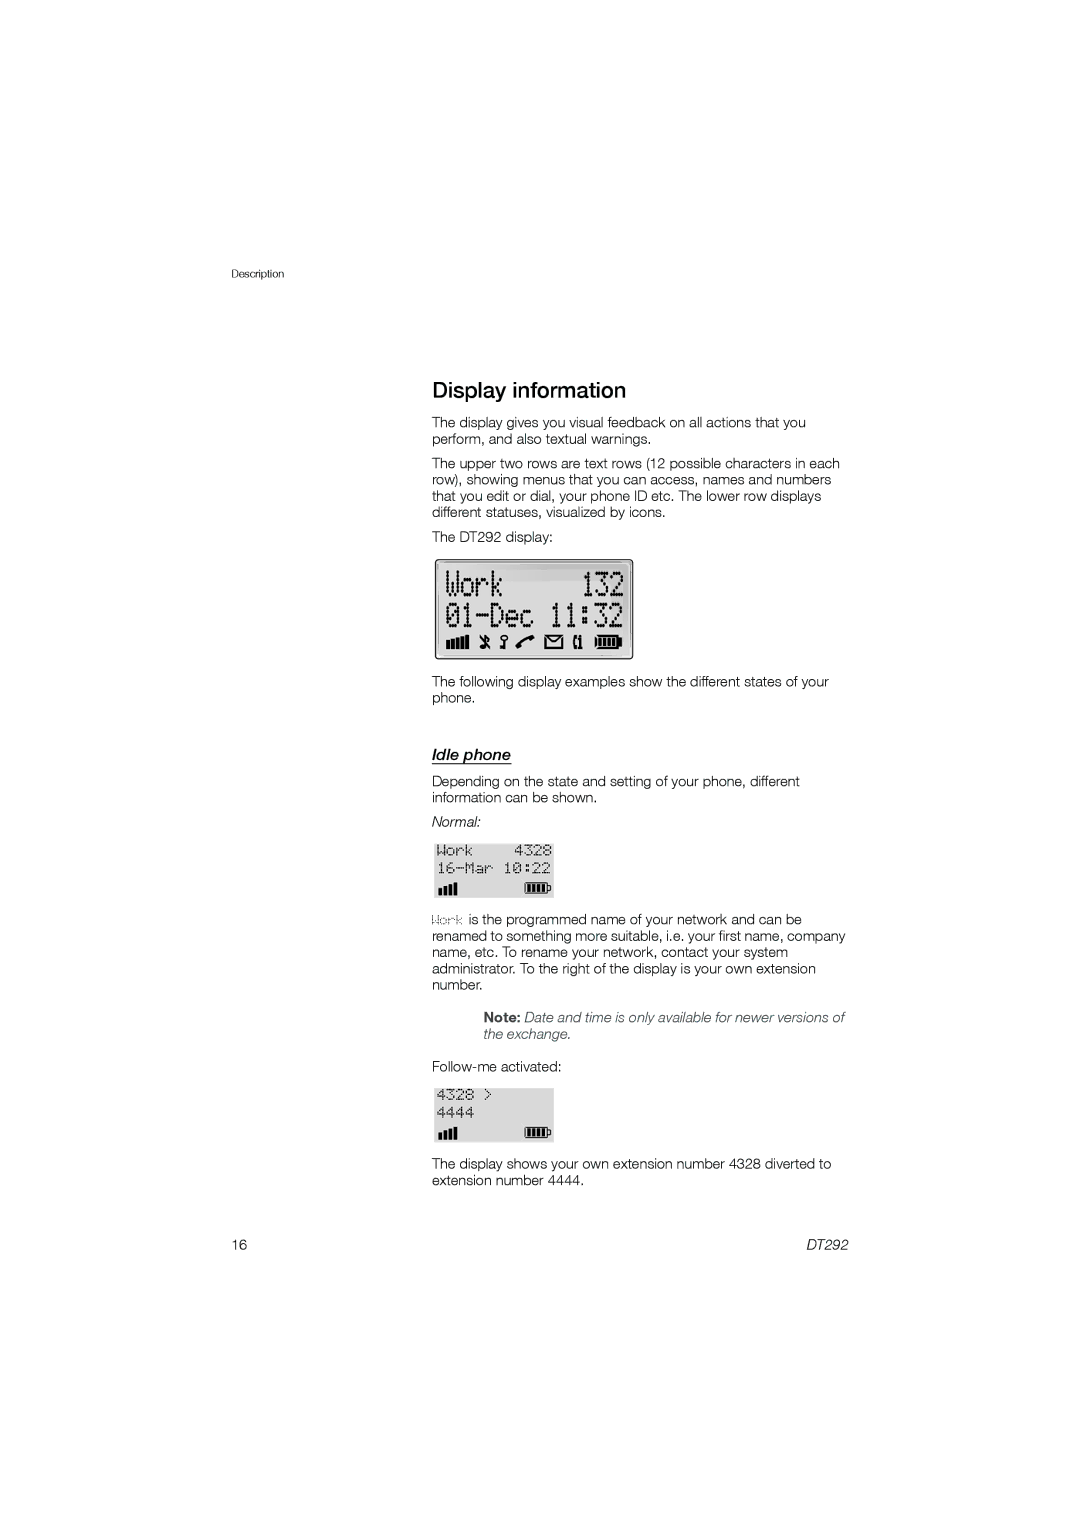 Ericsson DT292 manual Display information, Idle phone 